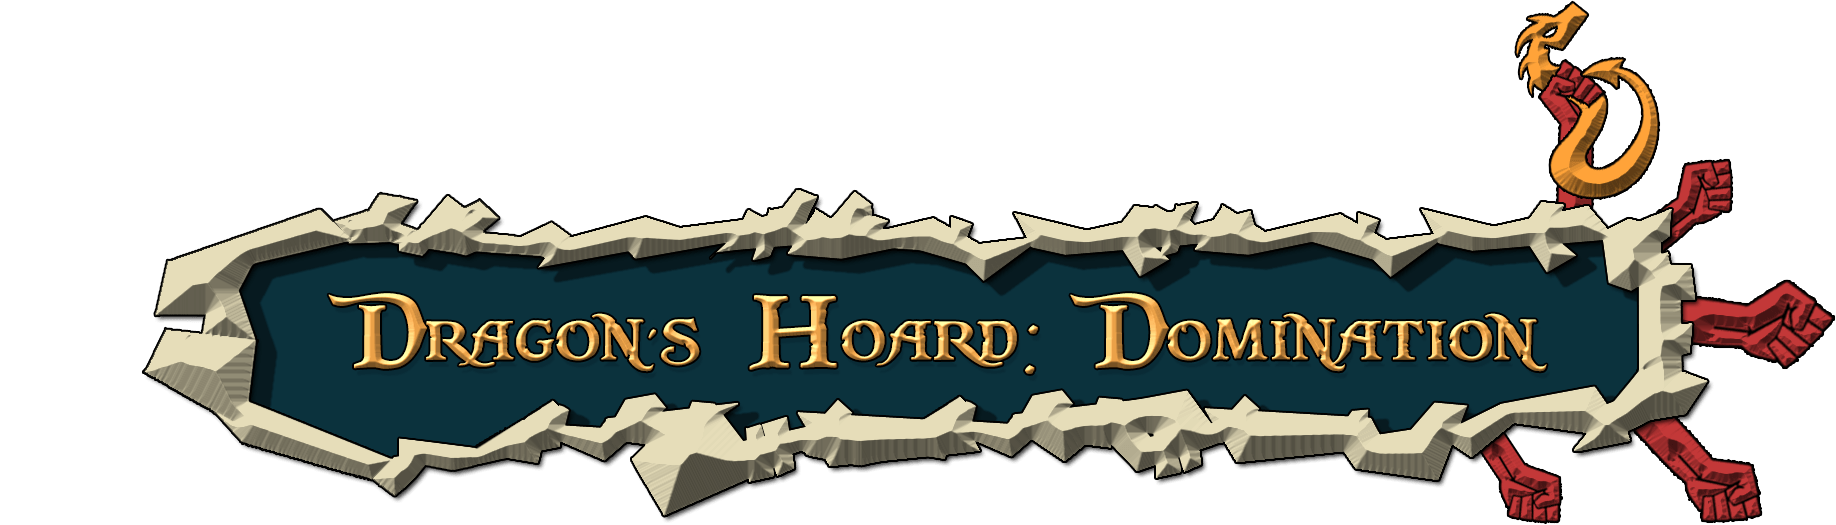 Planet Forge Games Dragon Hoard Domination RPG Sidescrolling Dragon Game